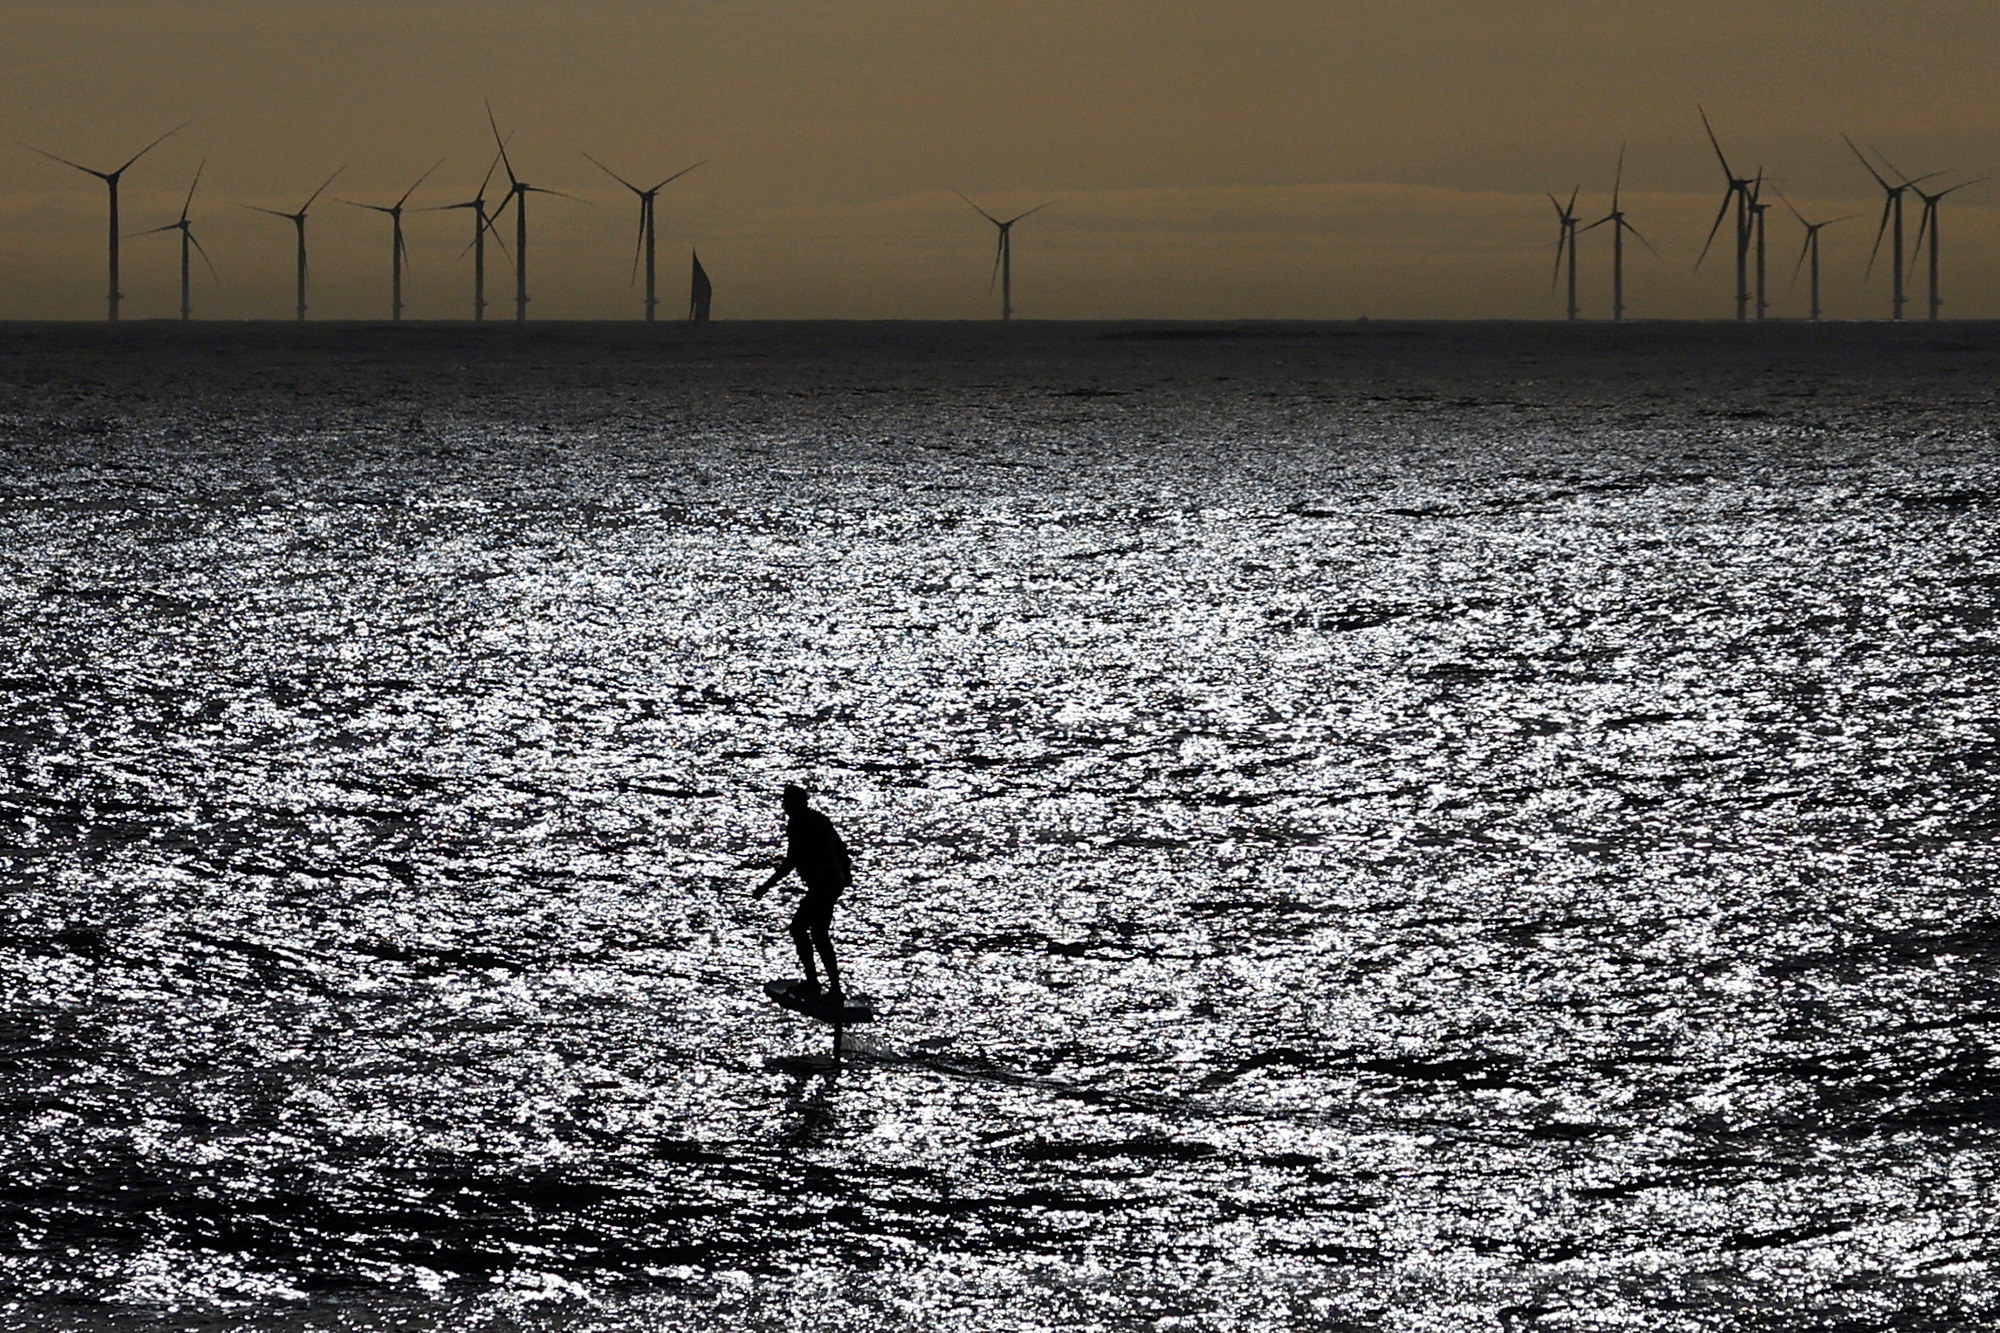 Open water at dusk; a small shadowy outline of someone on a surfboard in the middle; a line of windmills in the background